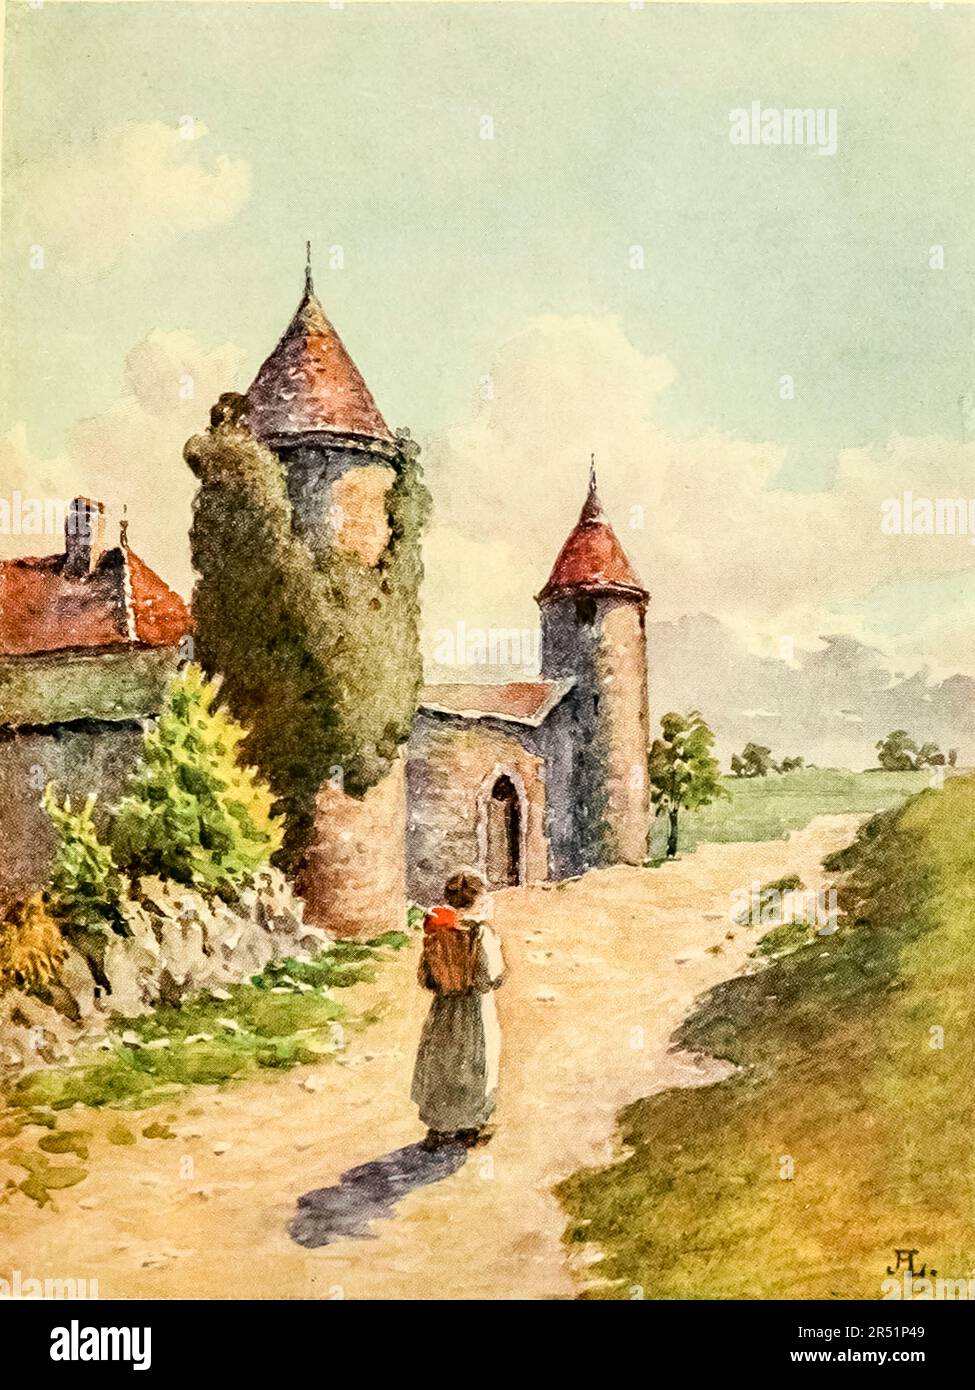 The Castle of Etrembieres, Hte. Savoie watercolour painting by J. Hardwicke Lewis and May Hardwicke Lewis from the book ' Geneva ' by Francis Henry Gribble Publication date 1908 in London : by Adam and Charles Black Stock Photo